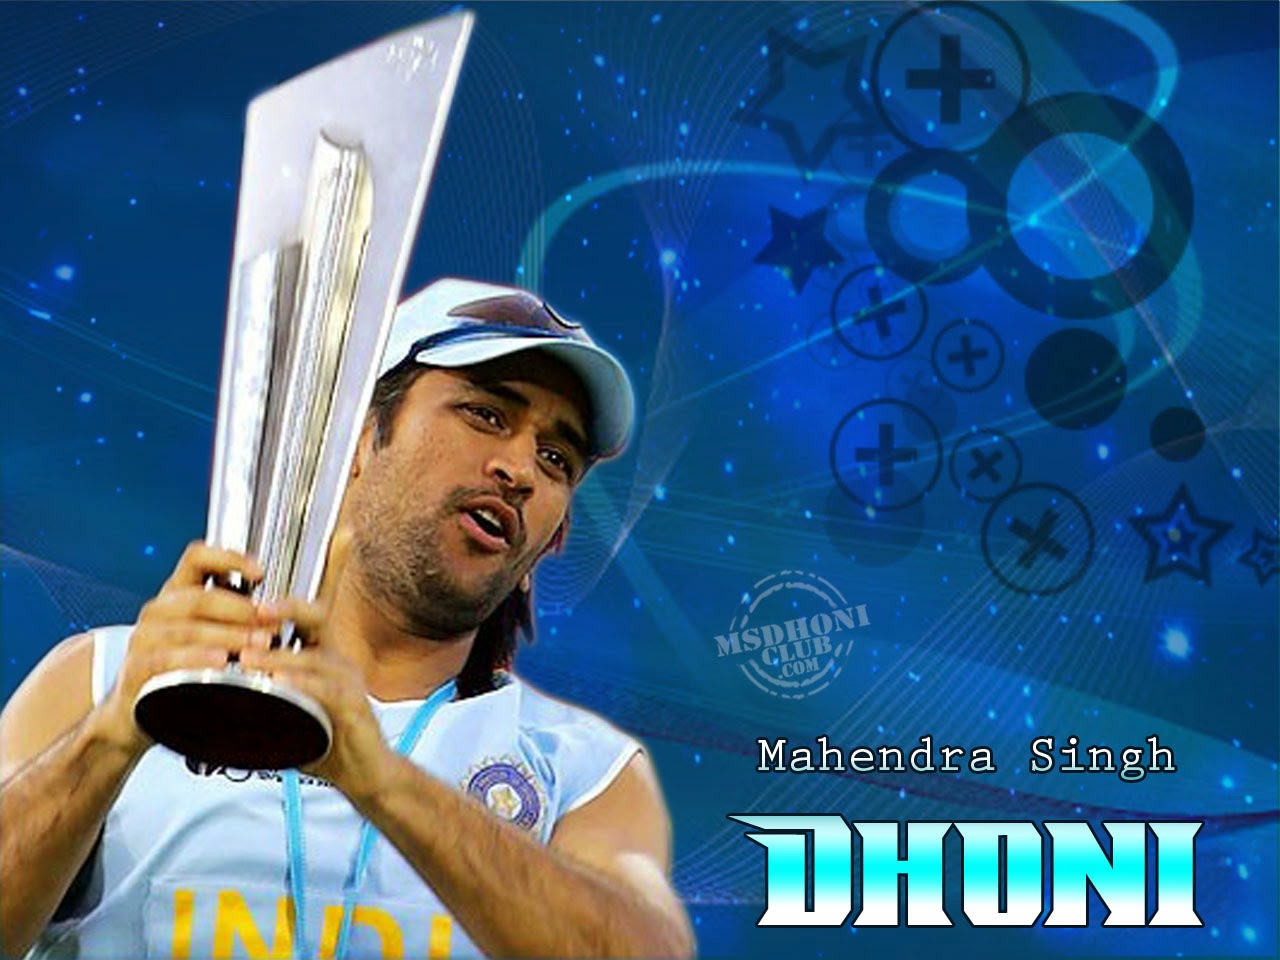 ms dhoni live wallpaper,music artist,photography,world,games,selfie